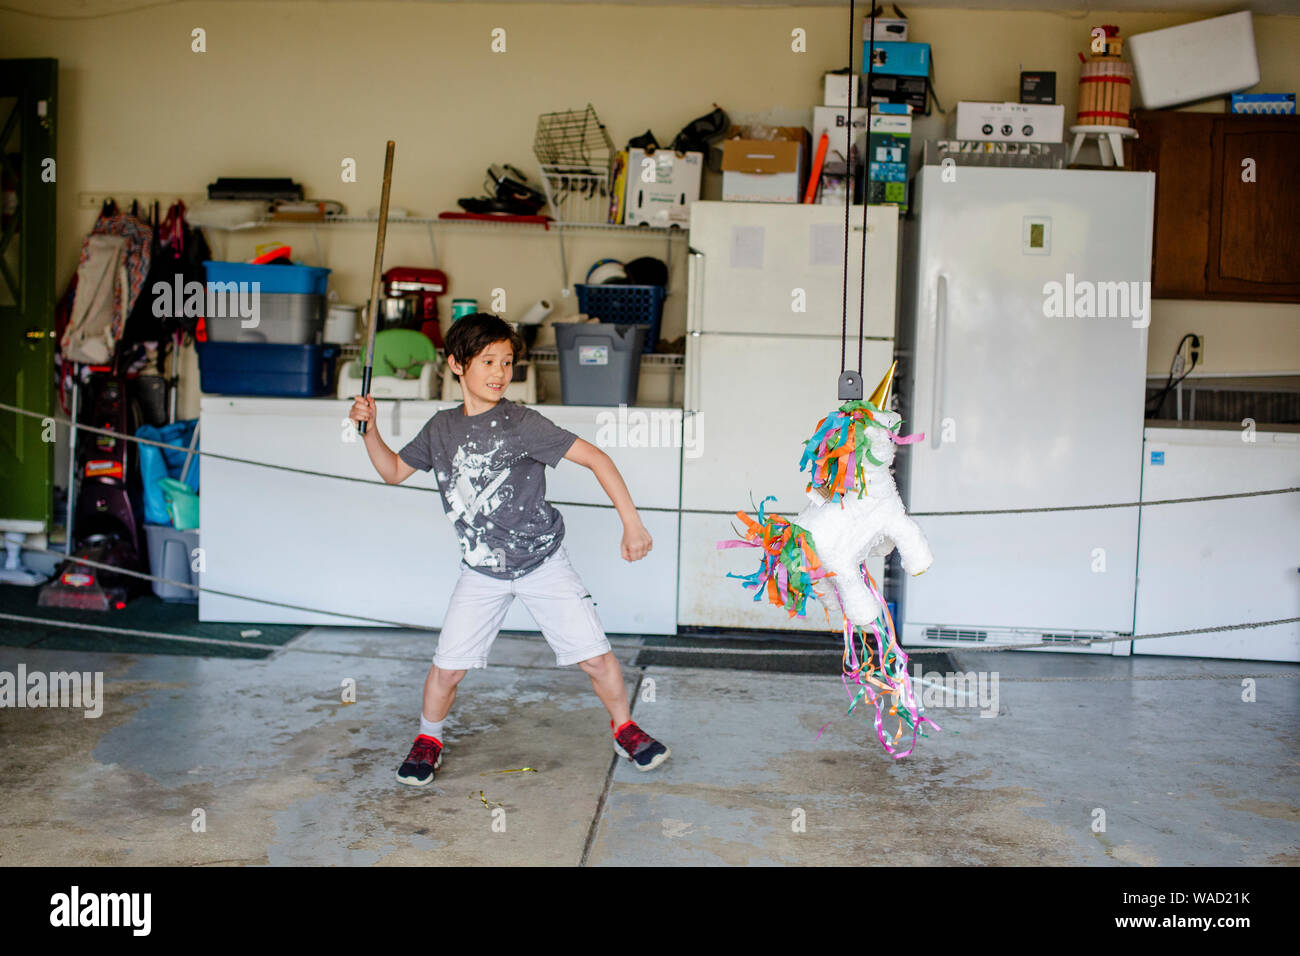 A smiling boy swings a stick at a birthday pinata Stock Photo